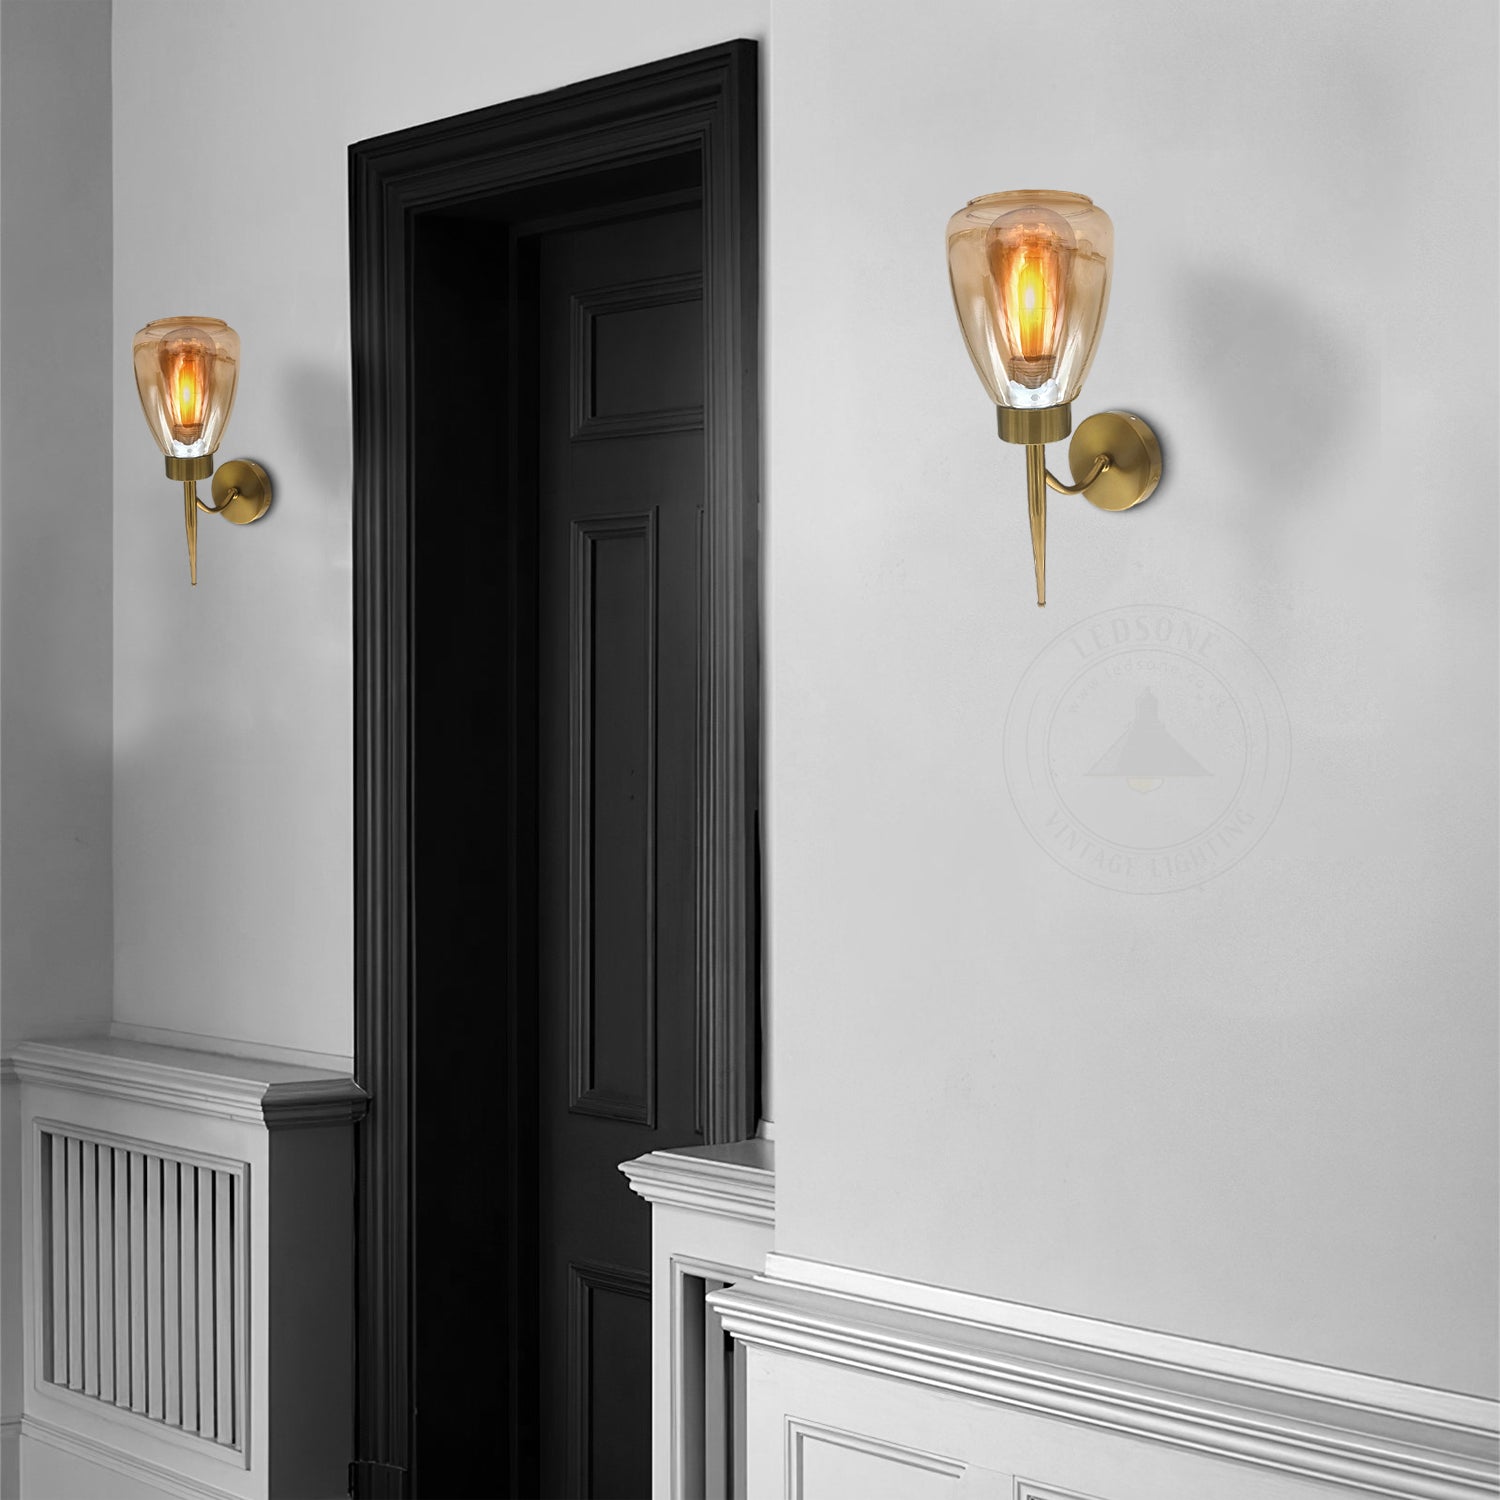 Amber Glass Wall Sconce with Copper Plated Finish – Perfect Illumination for Living Rooms, Bedside Reading, Stairs, Offices& Bars- Application imageAmber Glass Wall Sconce with Copper Plated Finish – Perfect Illumination for Living Rooms, Bedside Reading, Stairs, Offices& Bars- Application image